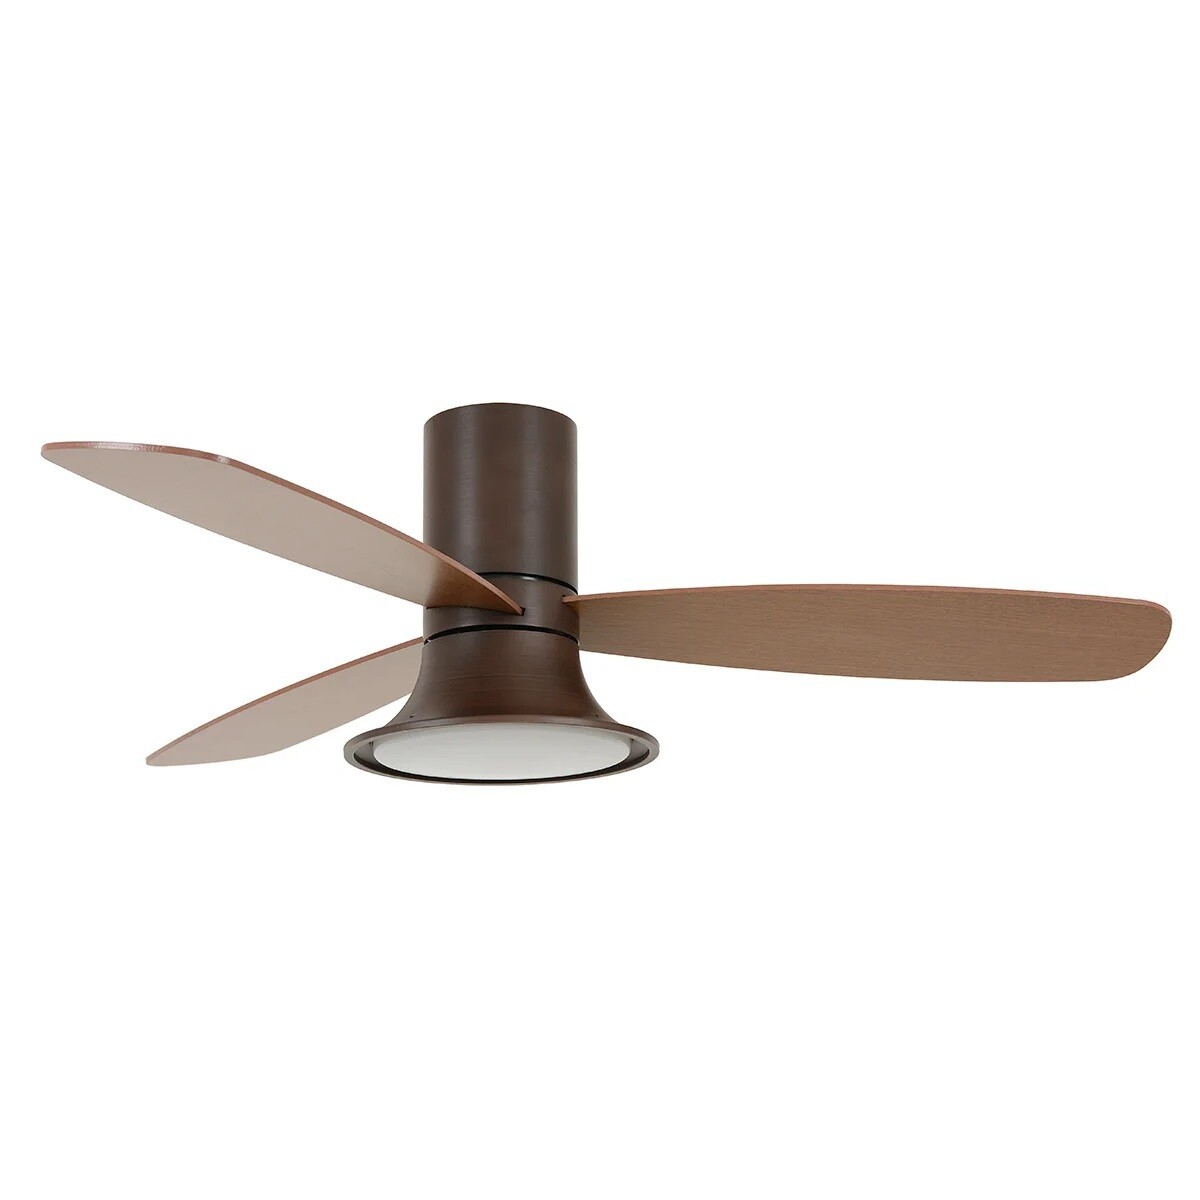 FLUSSO ORB ceiling fan Ø132cm light integrated and remote control included